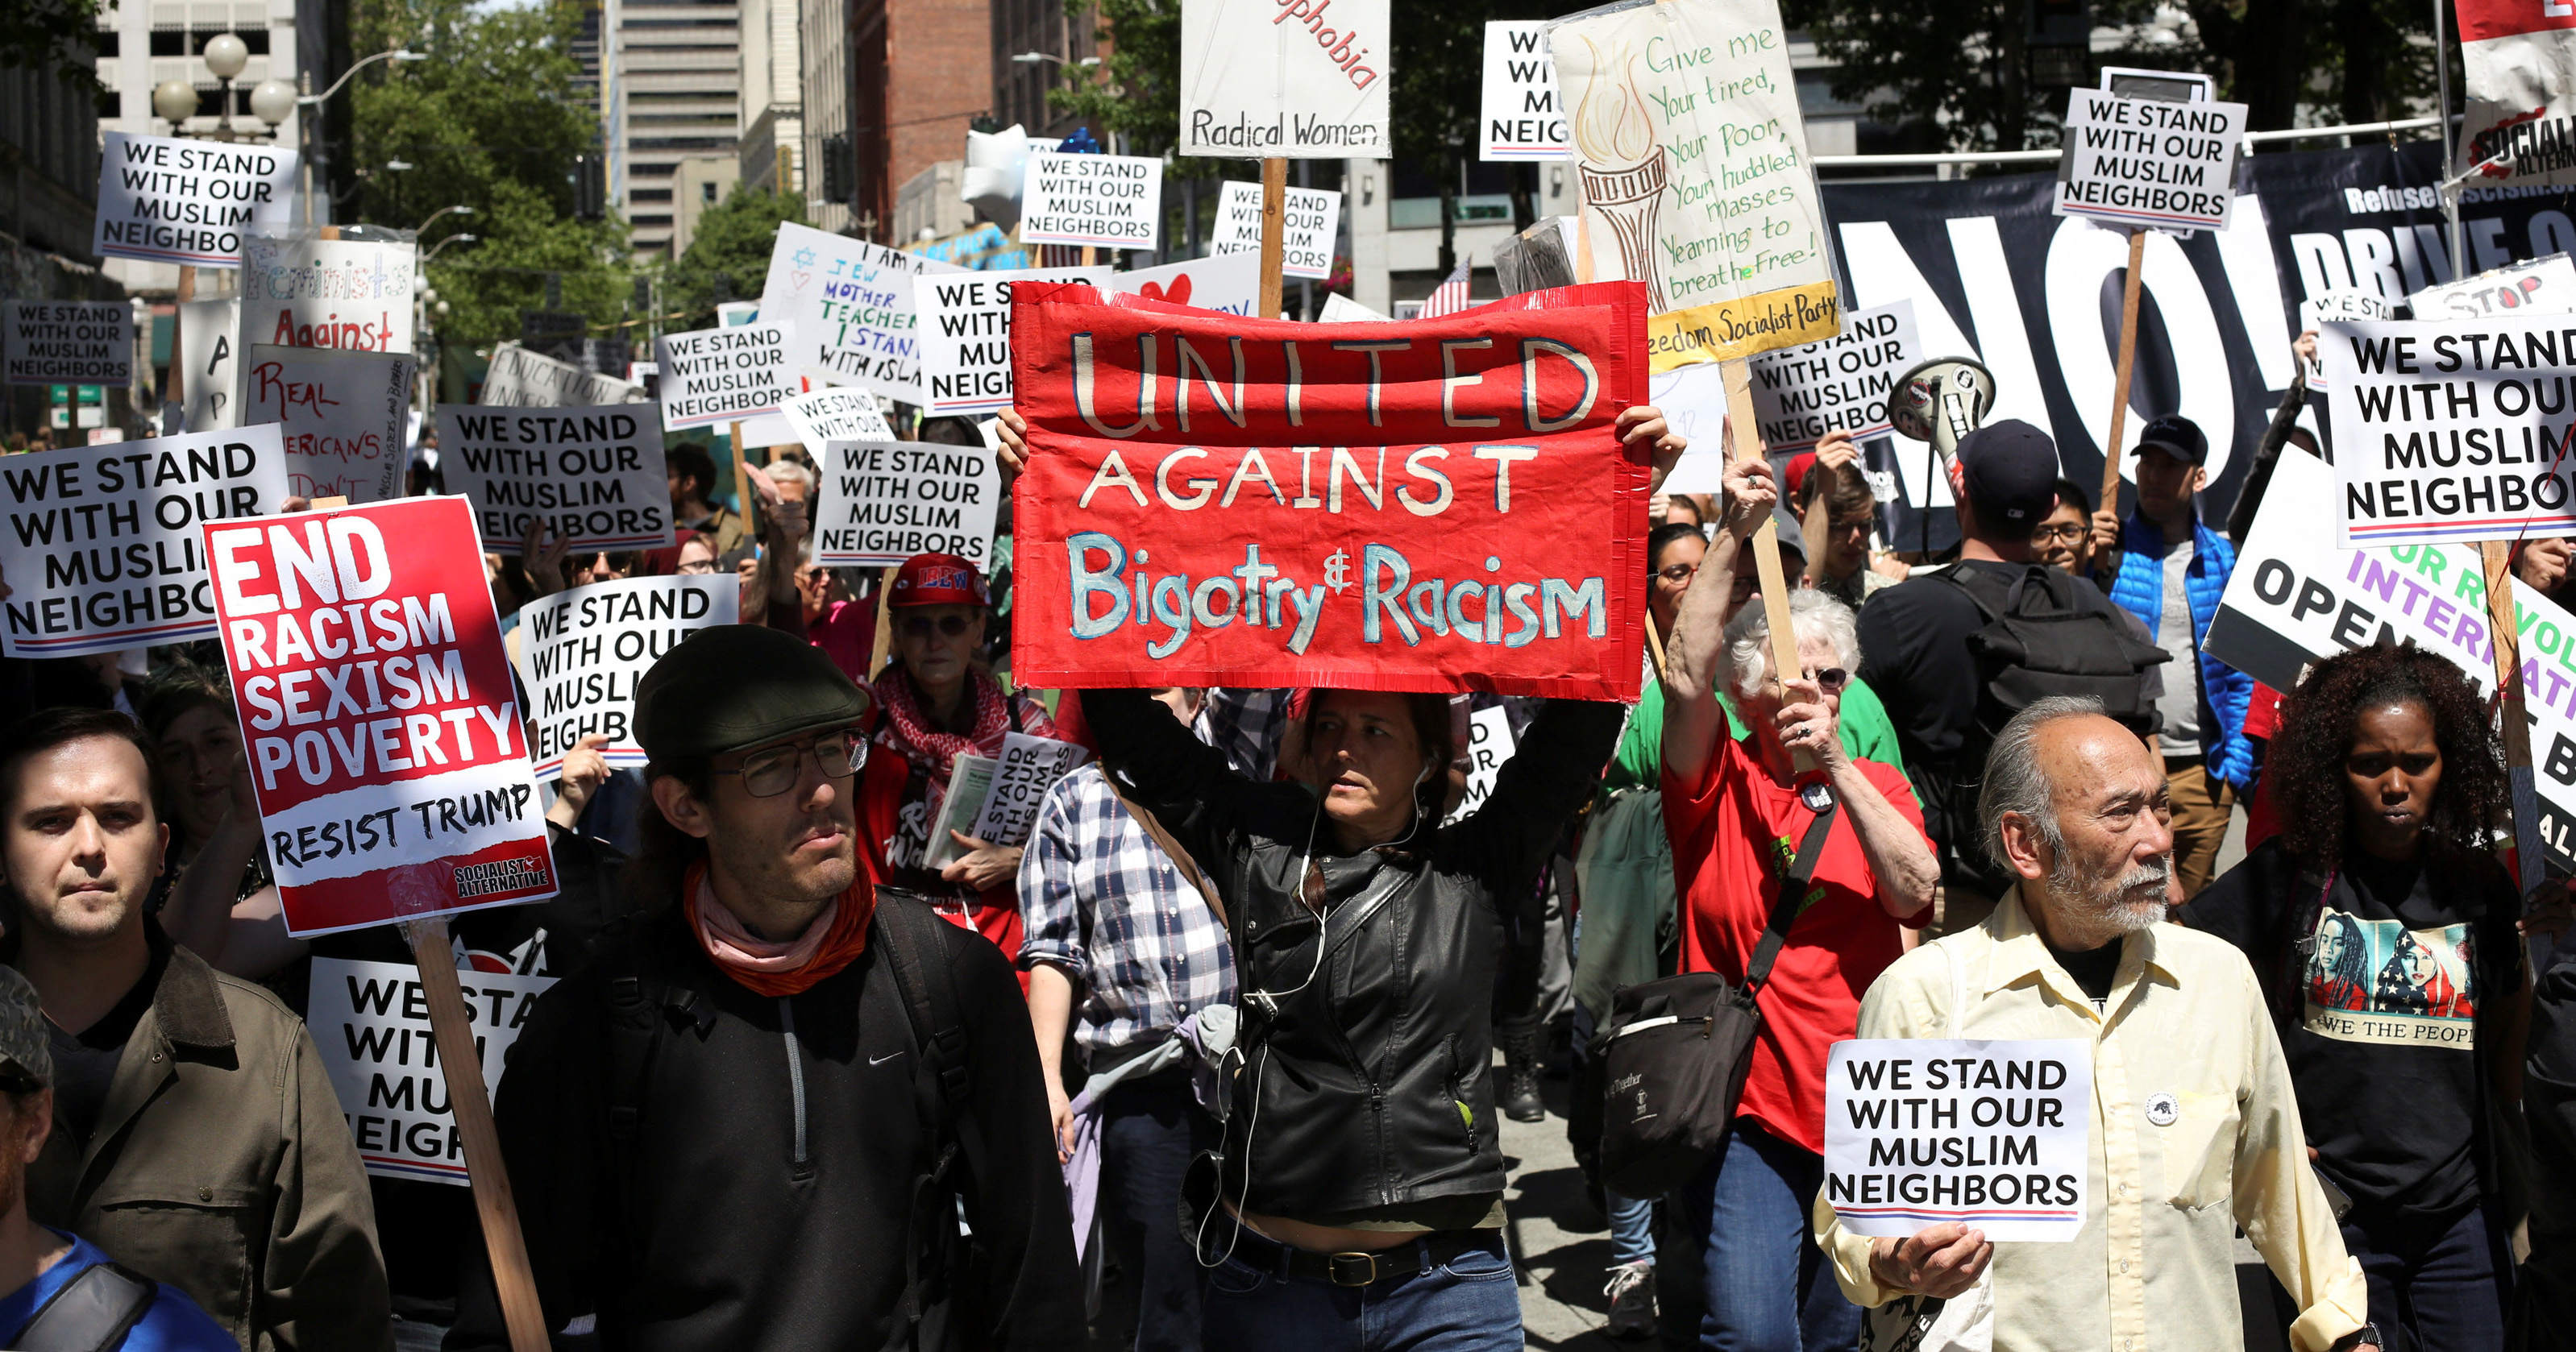 Anti-Muslim Hate Rallies Met With Opposition Across the US